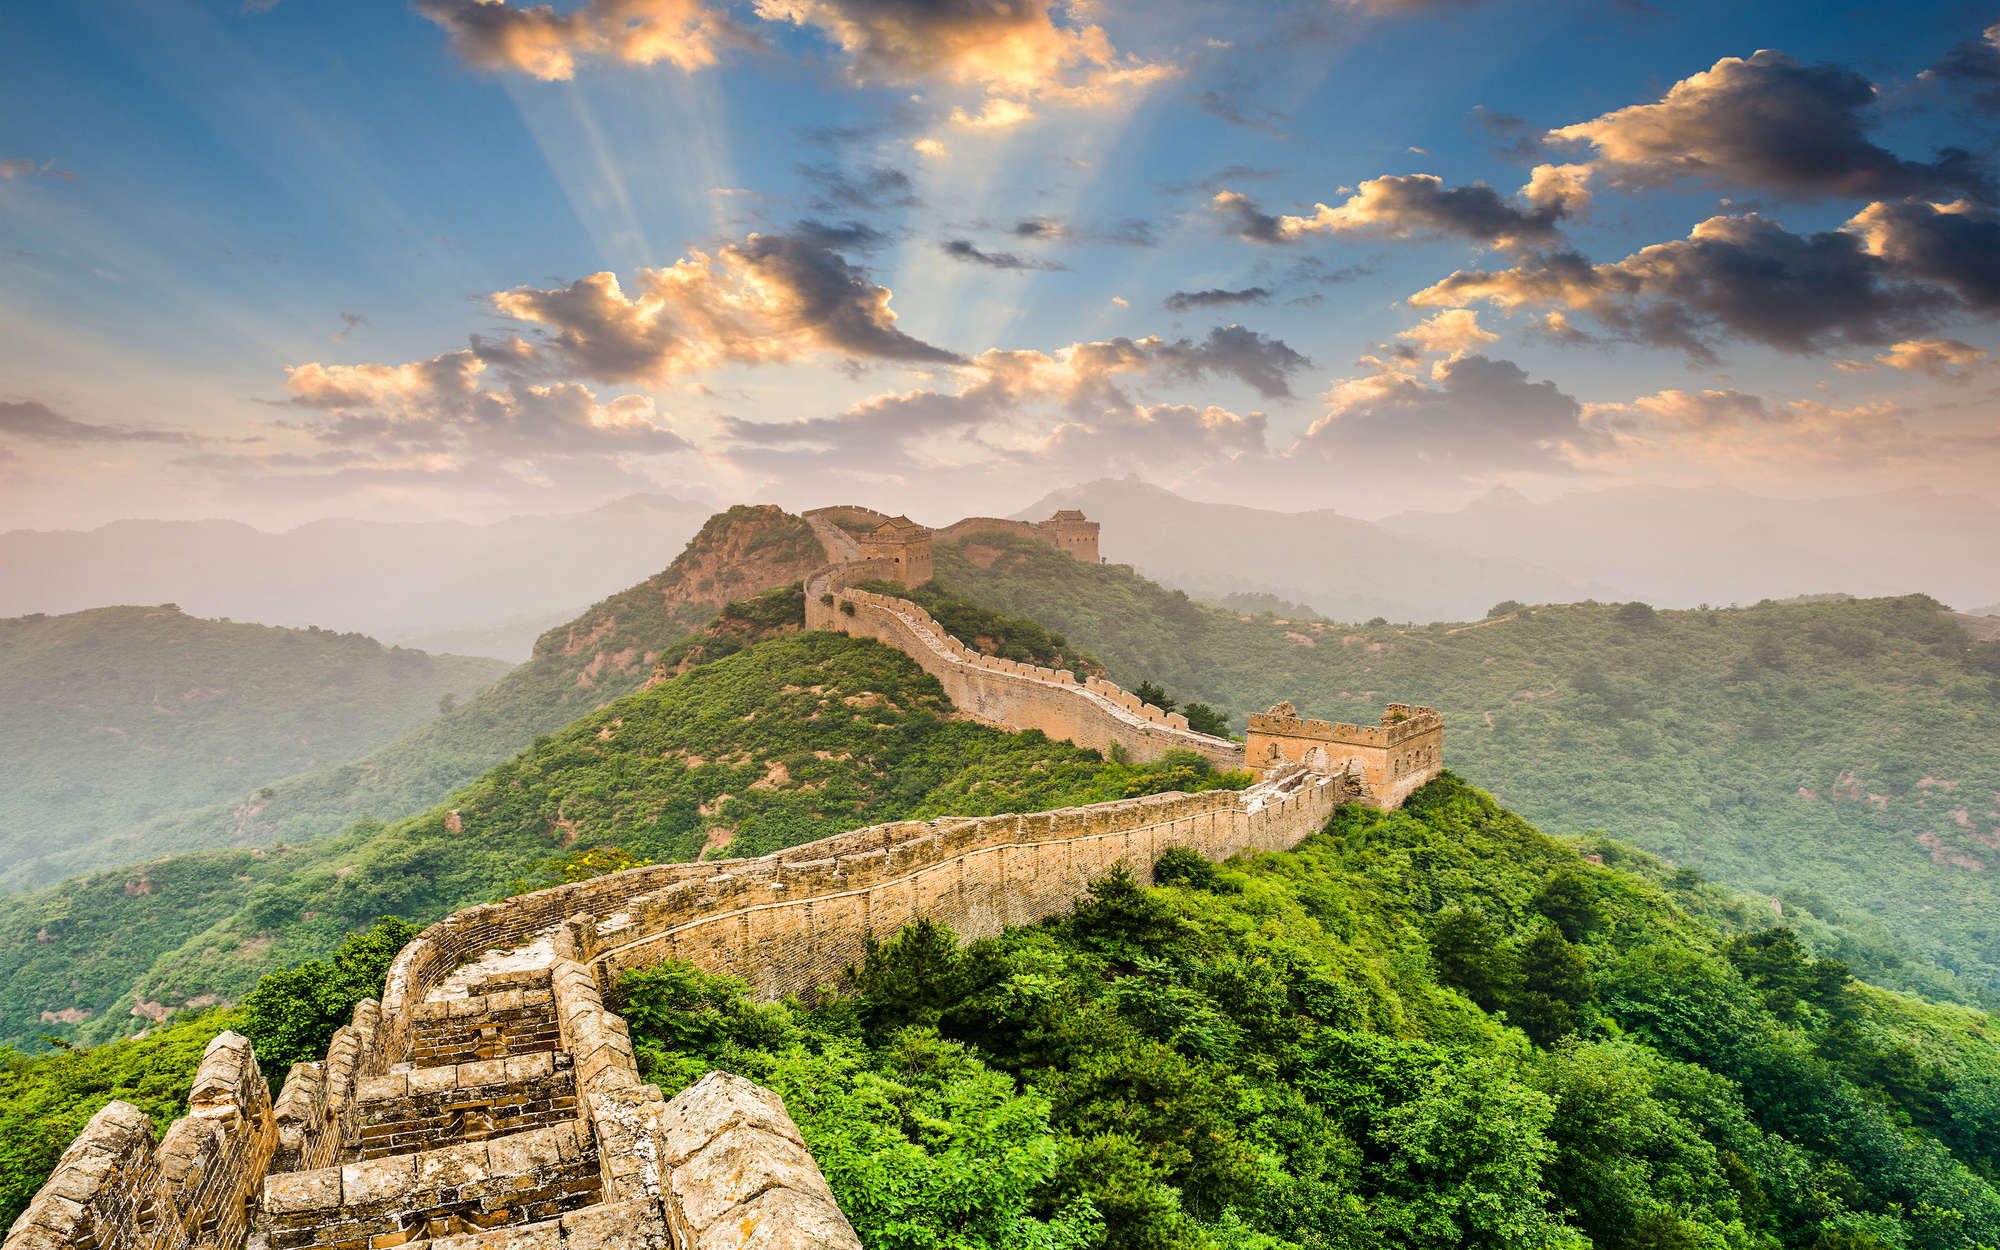             Photo wallpaper Chinese Wall in the Sunshine - Textured non-woven
        